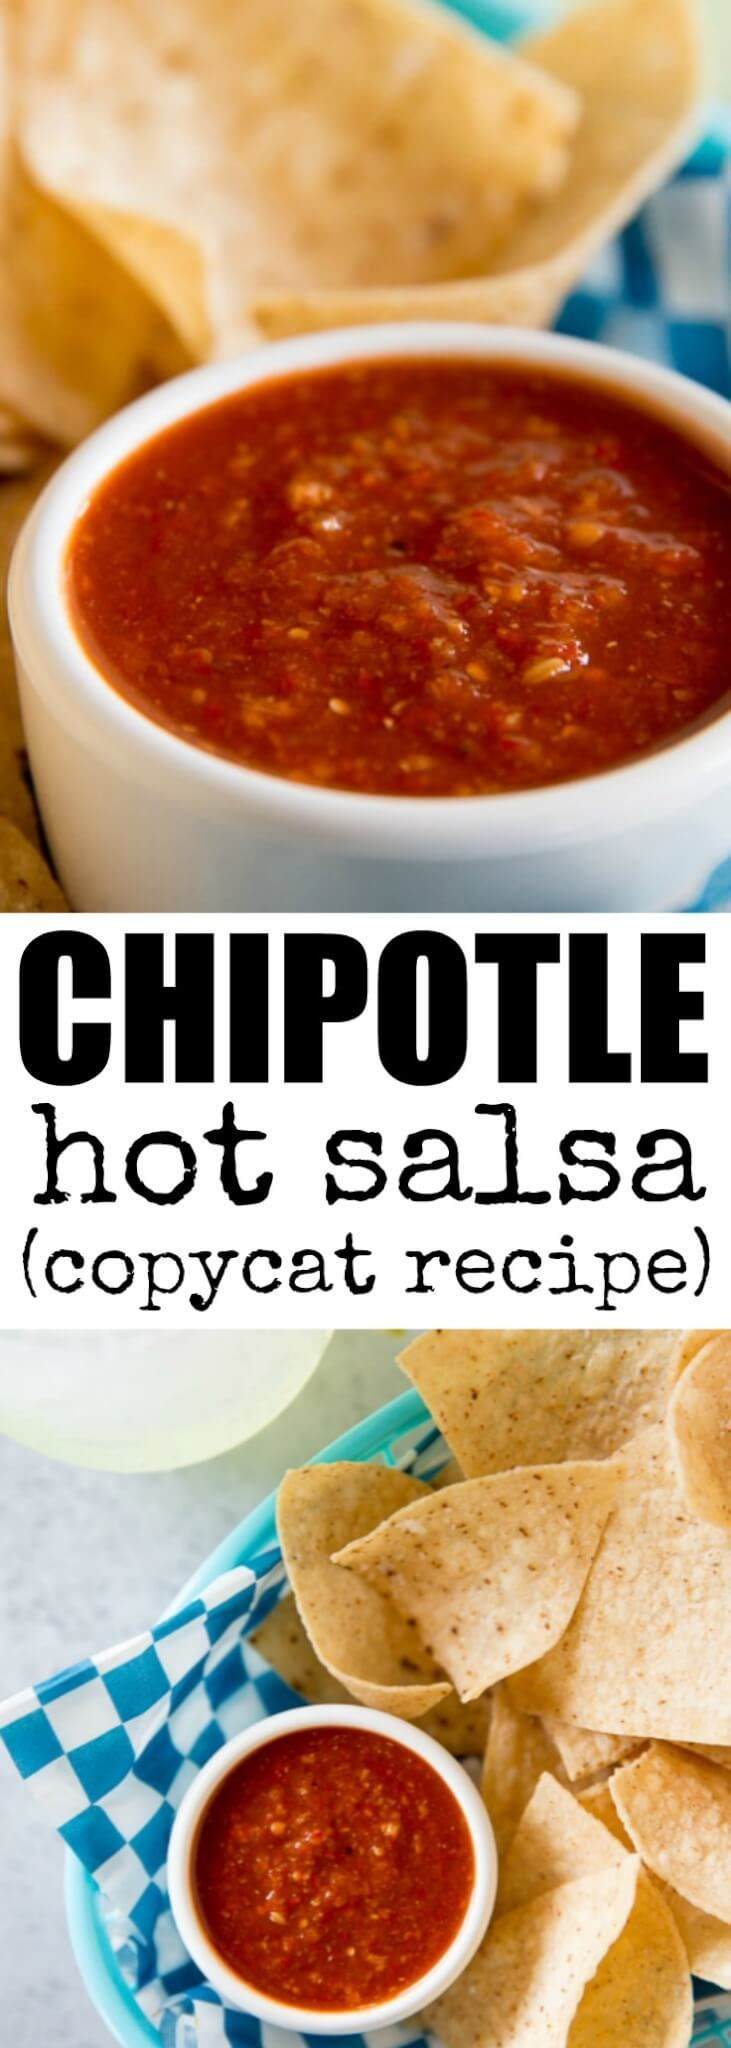 Chipotle Hot Salsa Recipe
 18 best Copycat Chipotle Mexican Grill Recipes images on